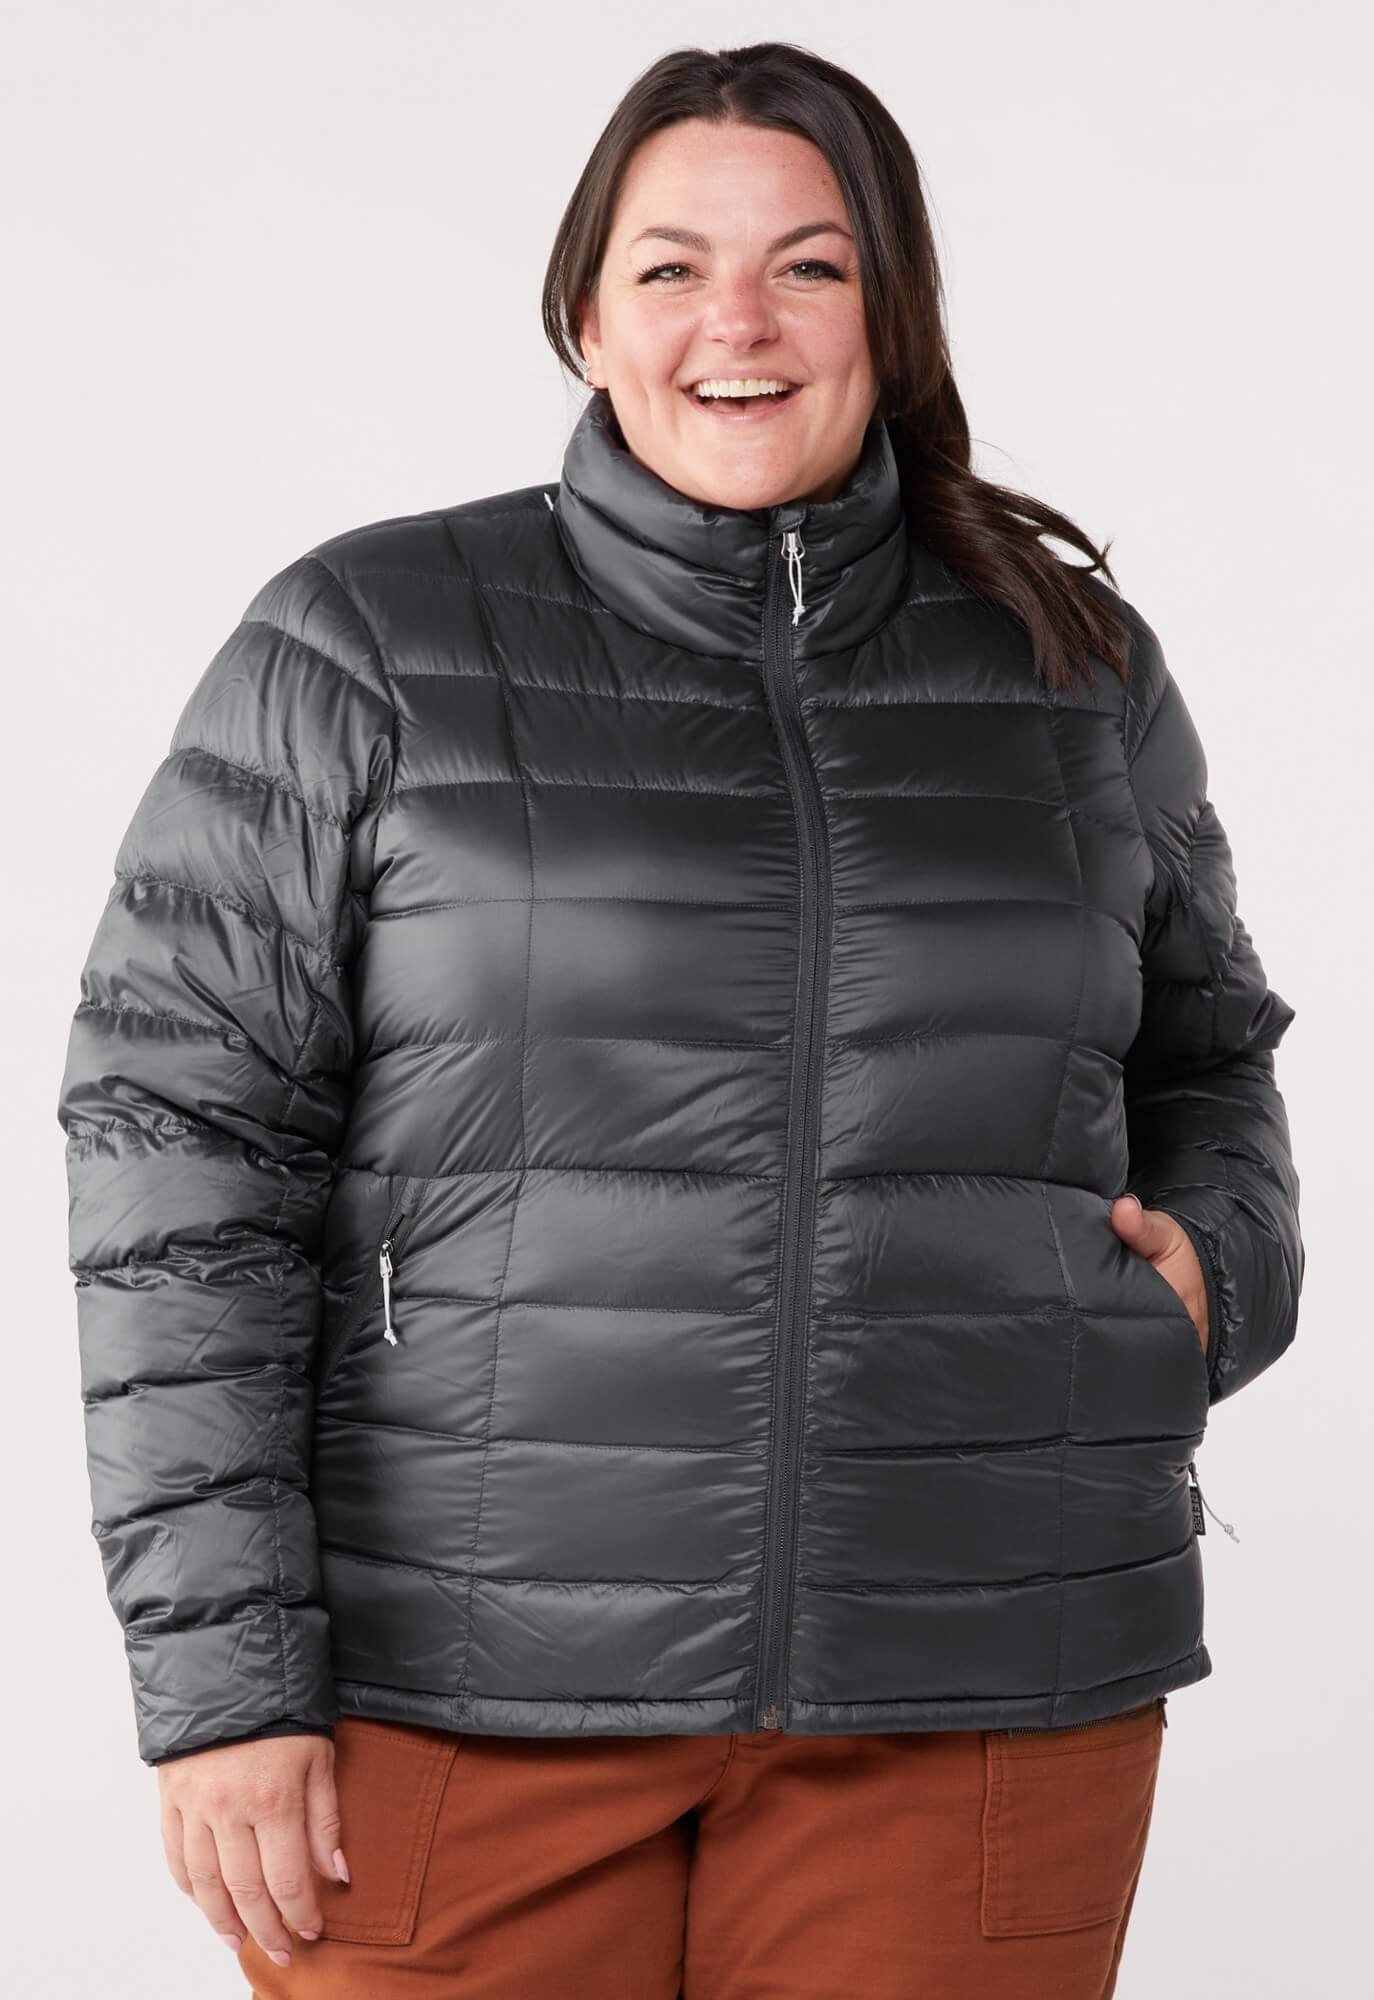 11 Puffer Jackets For Extra Warmth This Winter - The Good Trade